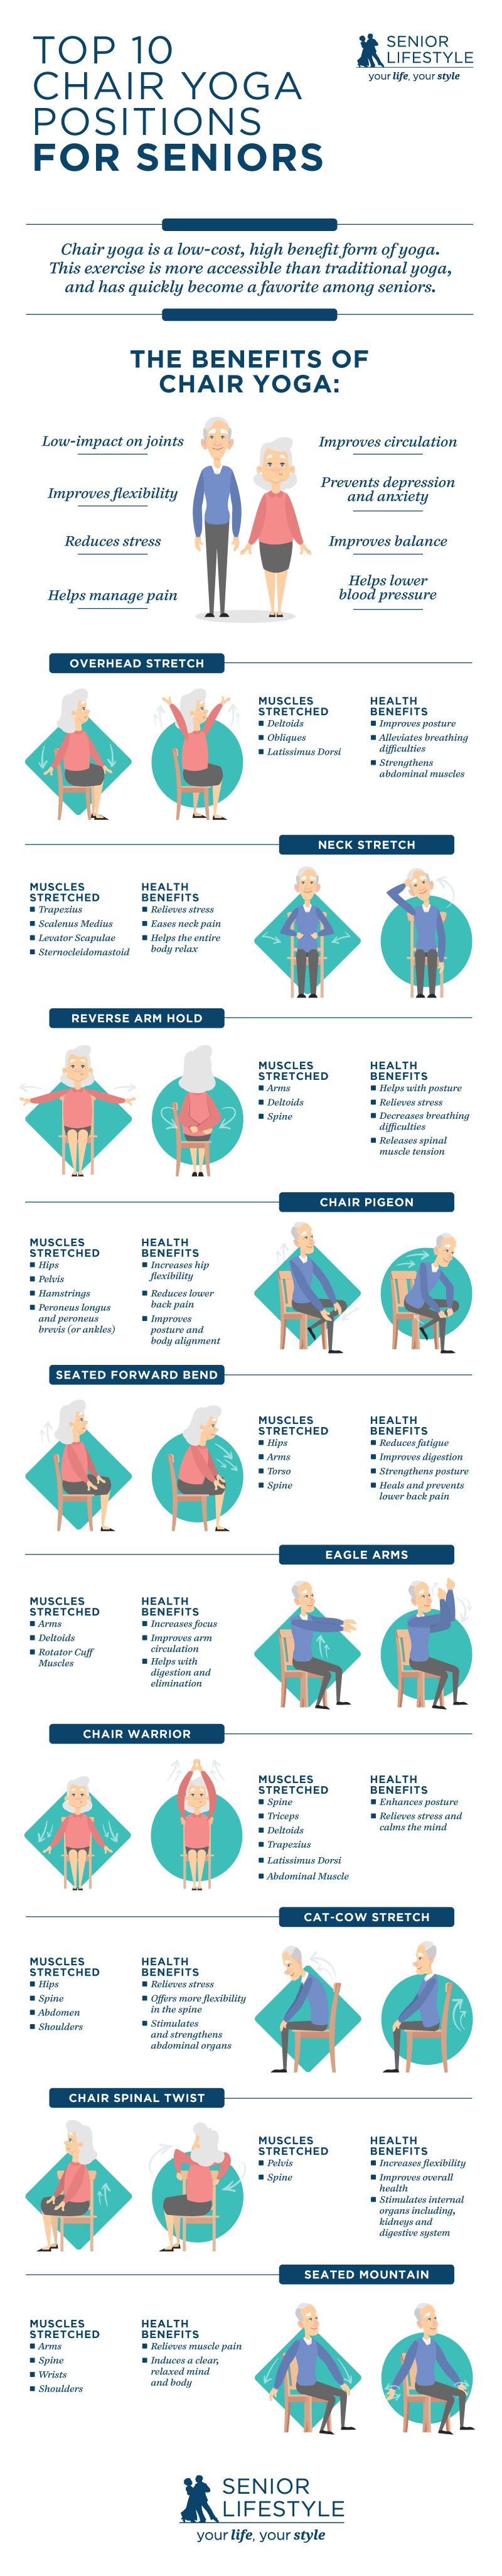 benefits of chair yoga for seniors